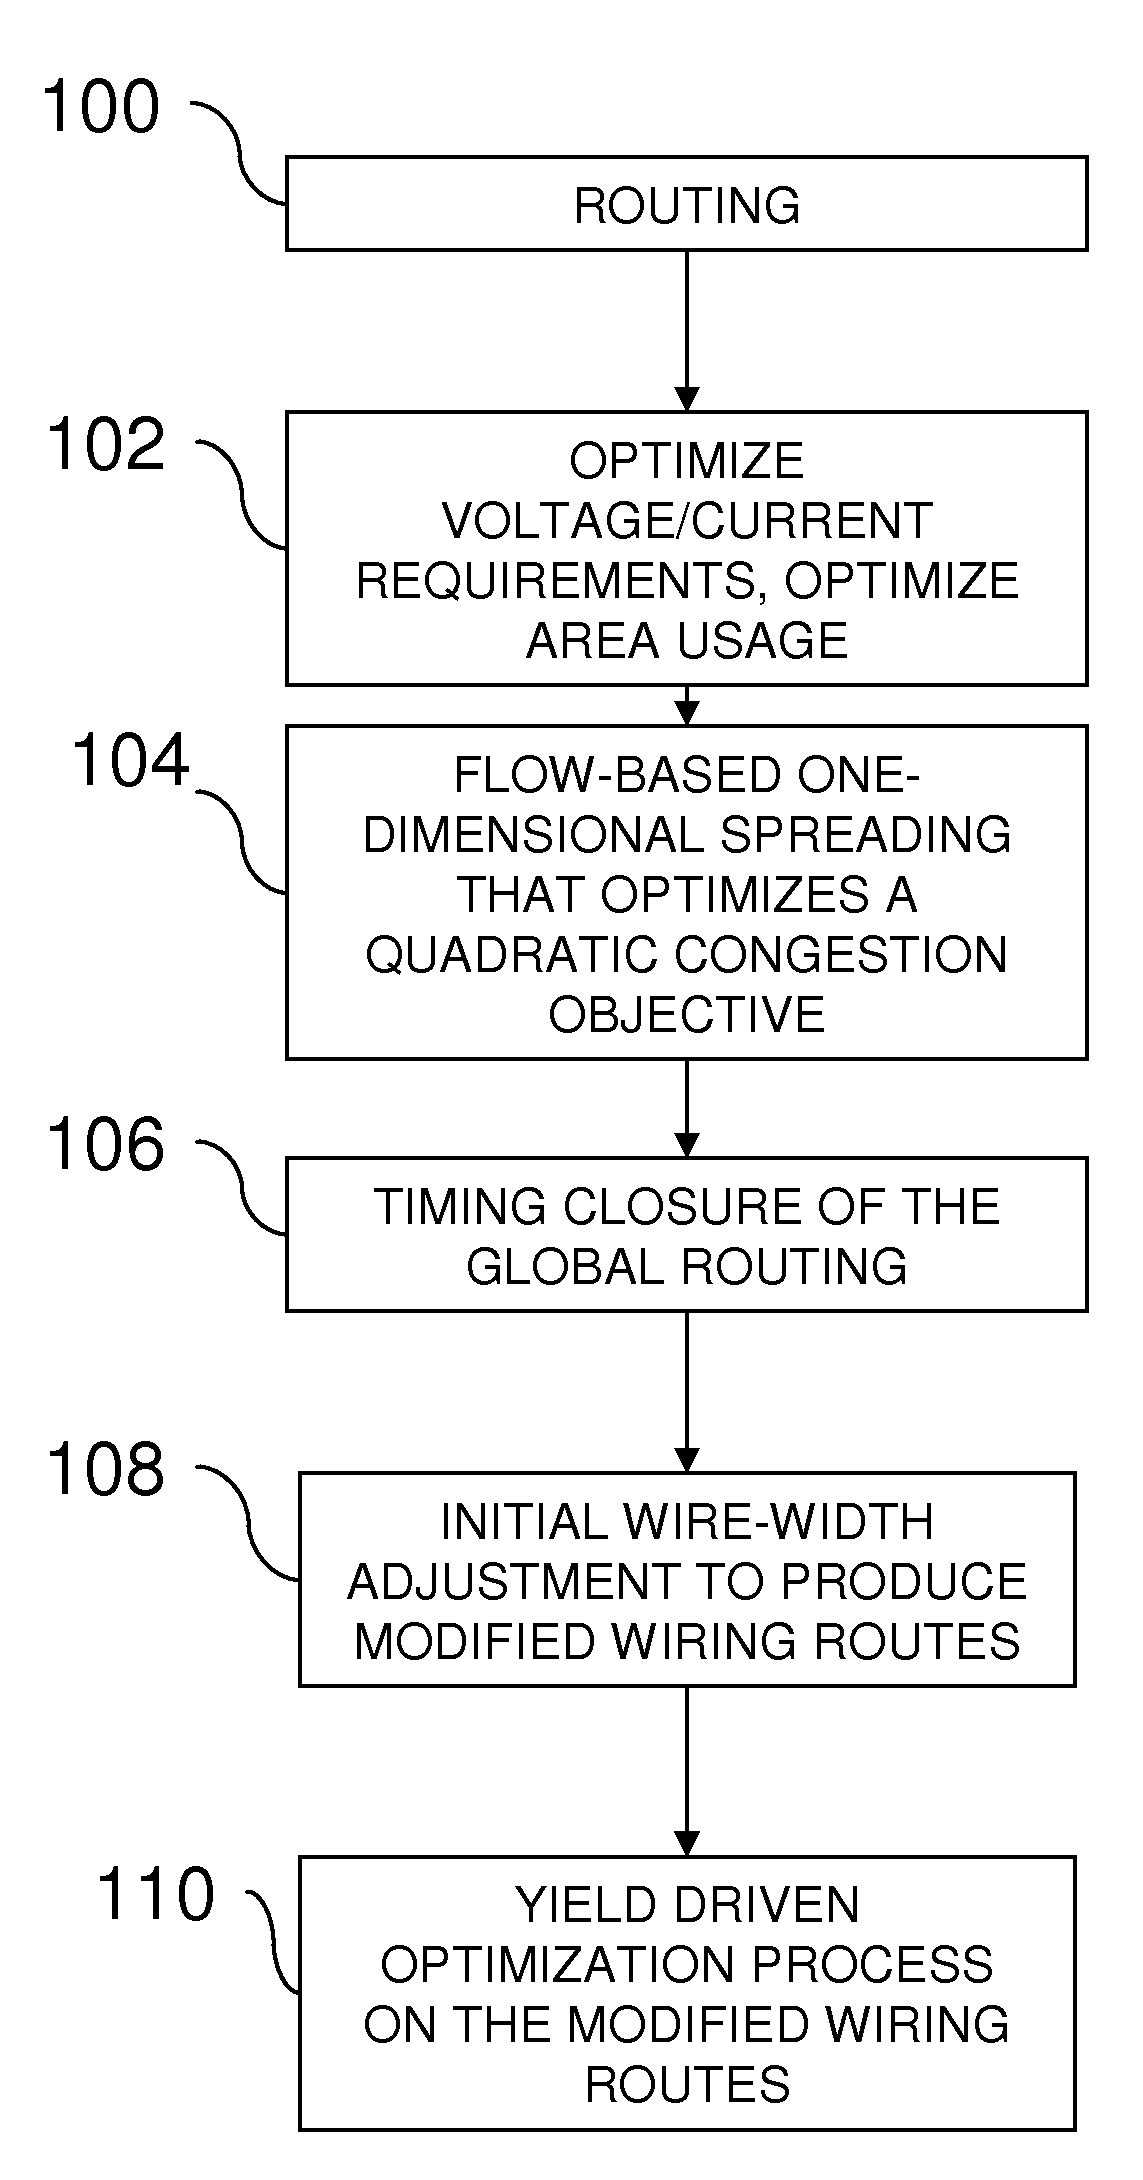 Method for IC wiring yield optimization, including wire widening during and after routing